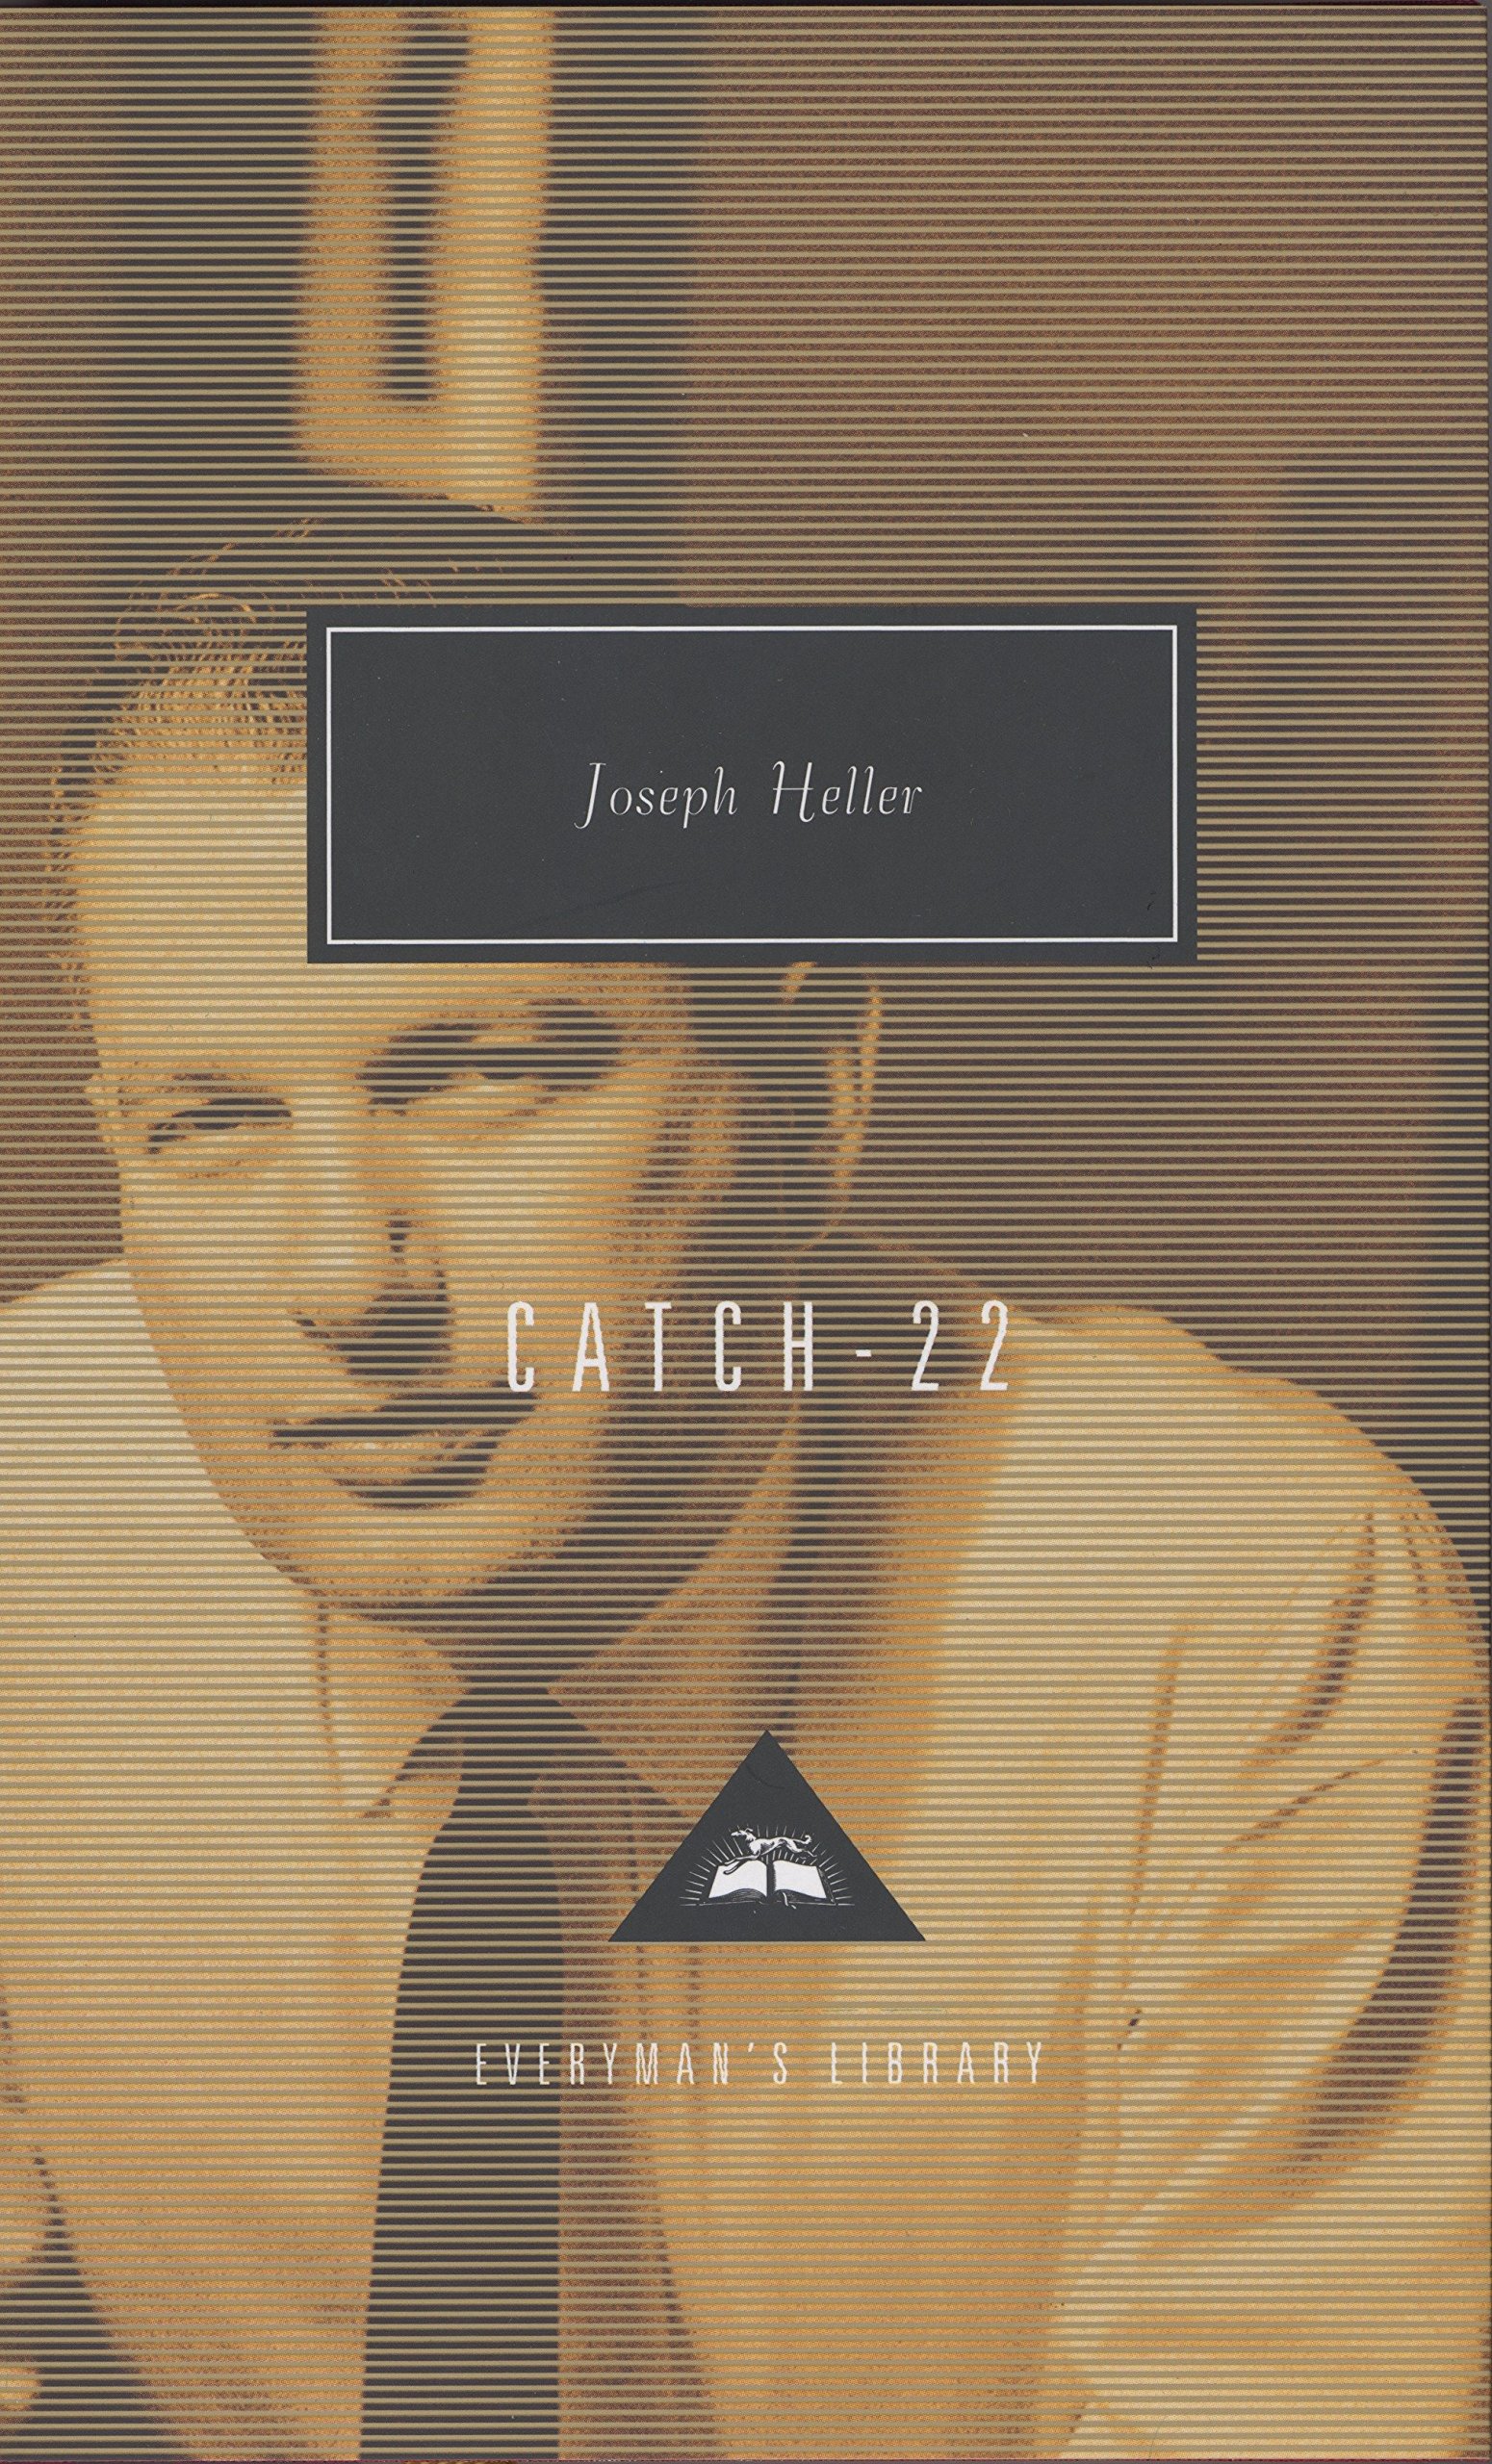 A book cover of joseph heller's "catch-22" from the everyman's library collection, featuring a sepia-toned photo of the author with the title prominently displayed in bold lettering.